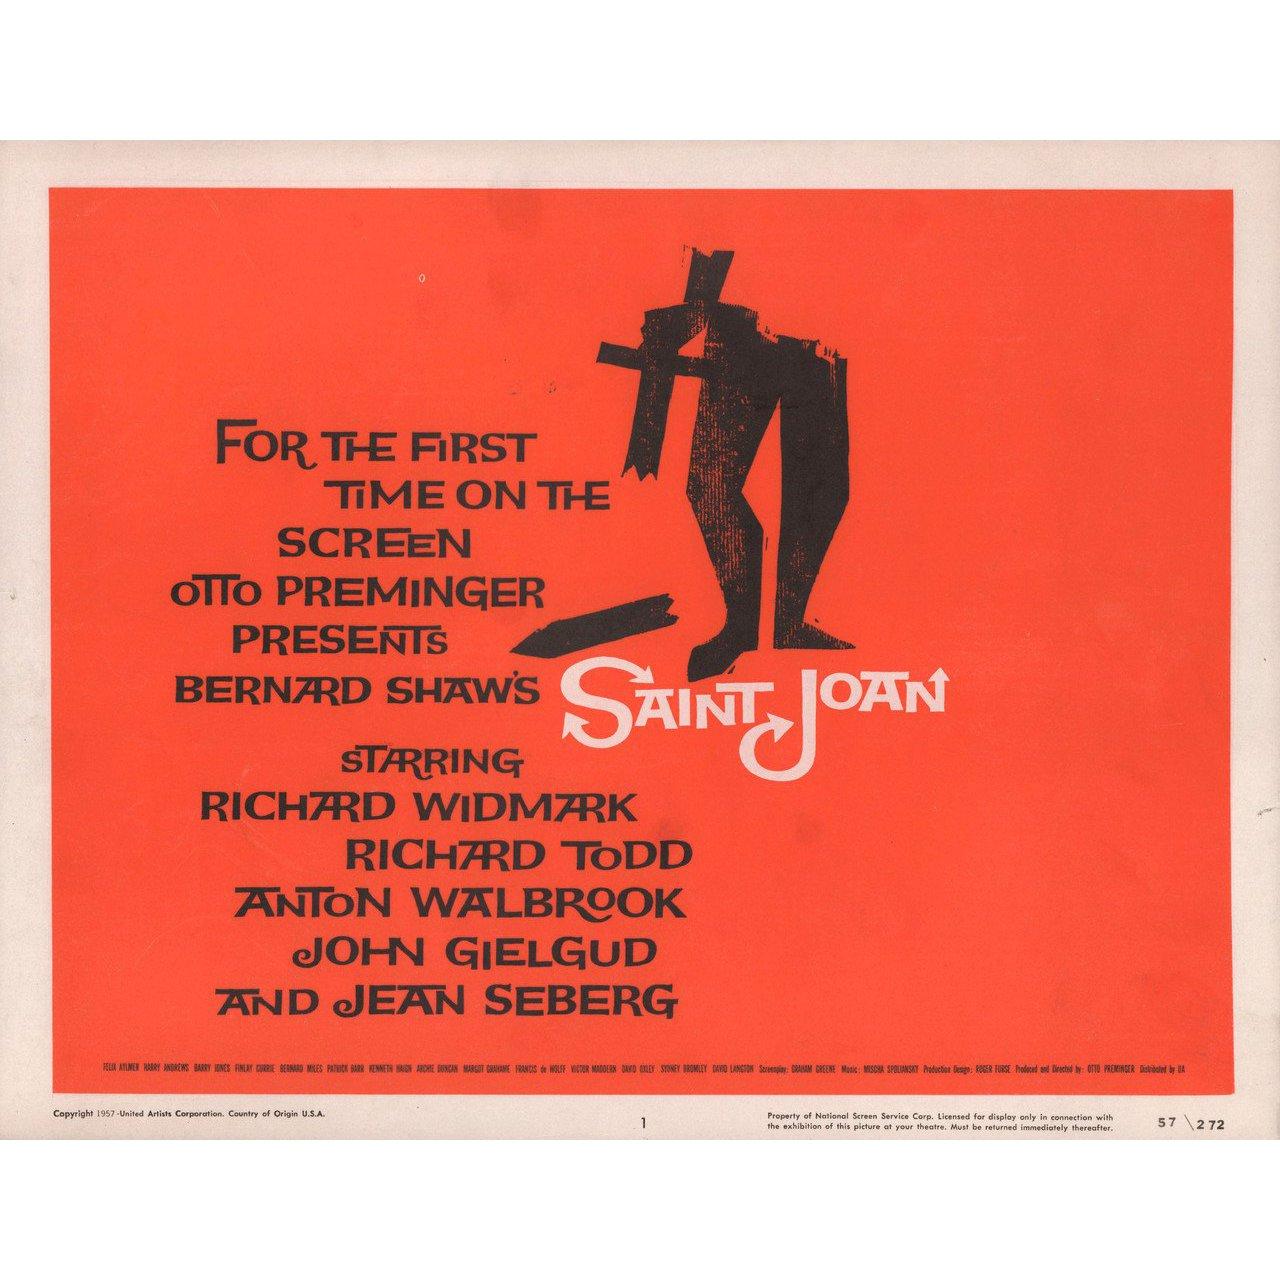 Original 1957 U.S. title card by Saul Bass for the film Saint Joan directed by Otto Preminger with Jean Seberg / Richard Widmark / Richard Todd / Anton Walbrook / John Gielgud. Very good-fine condition. Please note: the size is stated in inches and